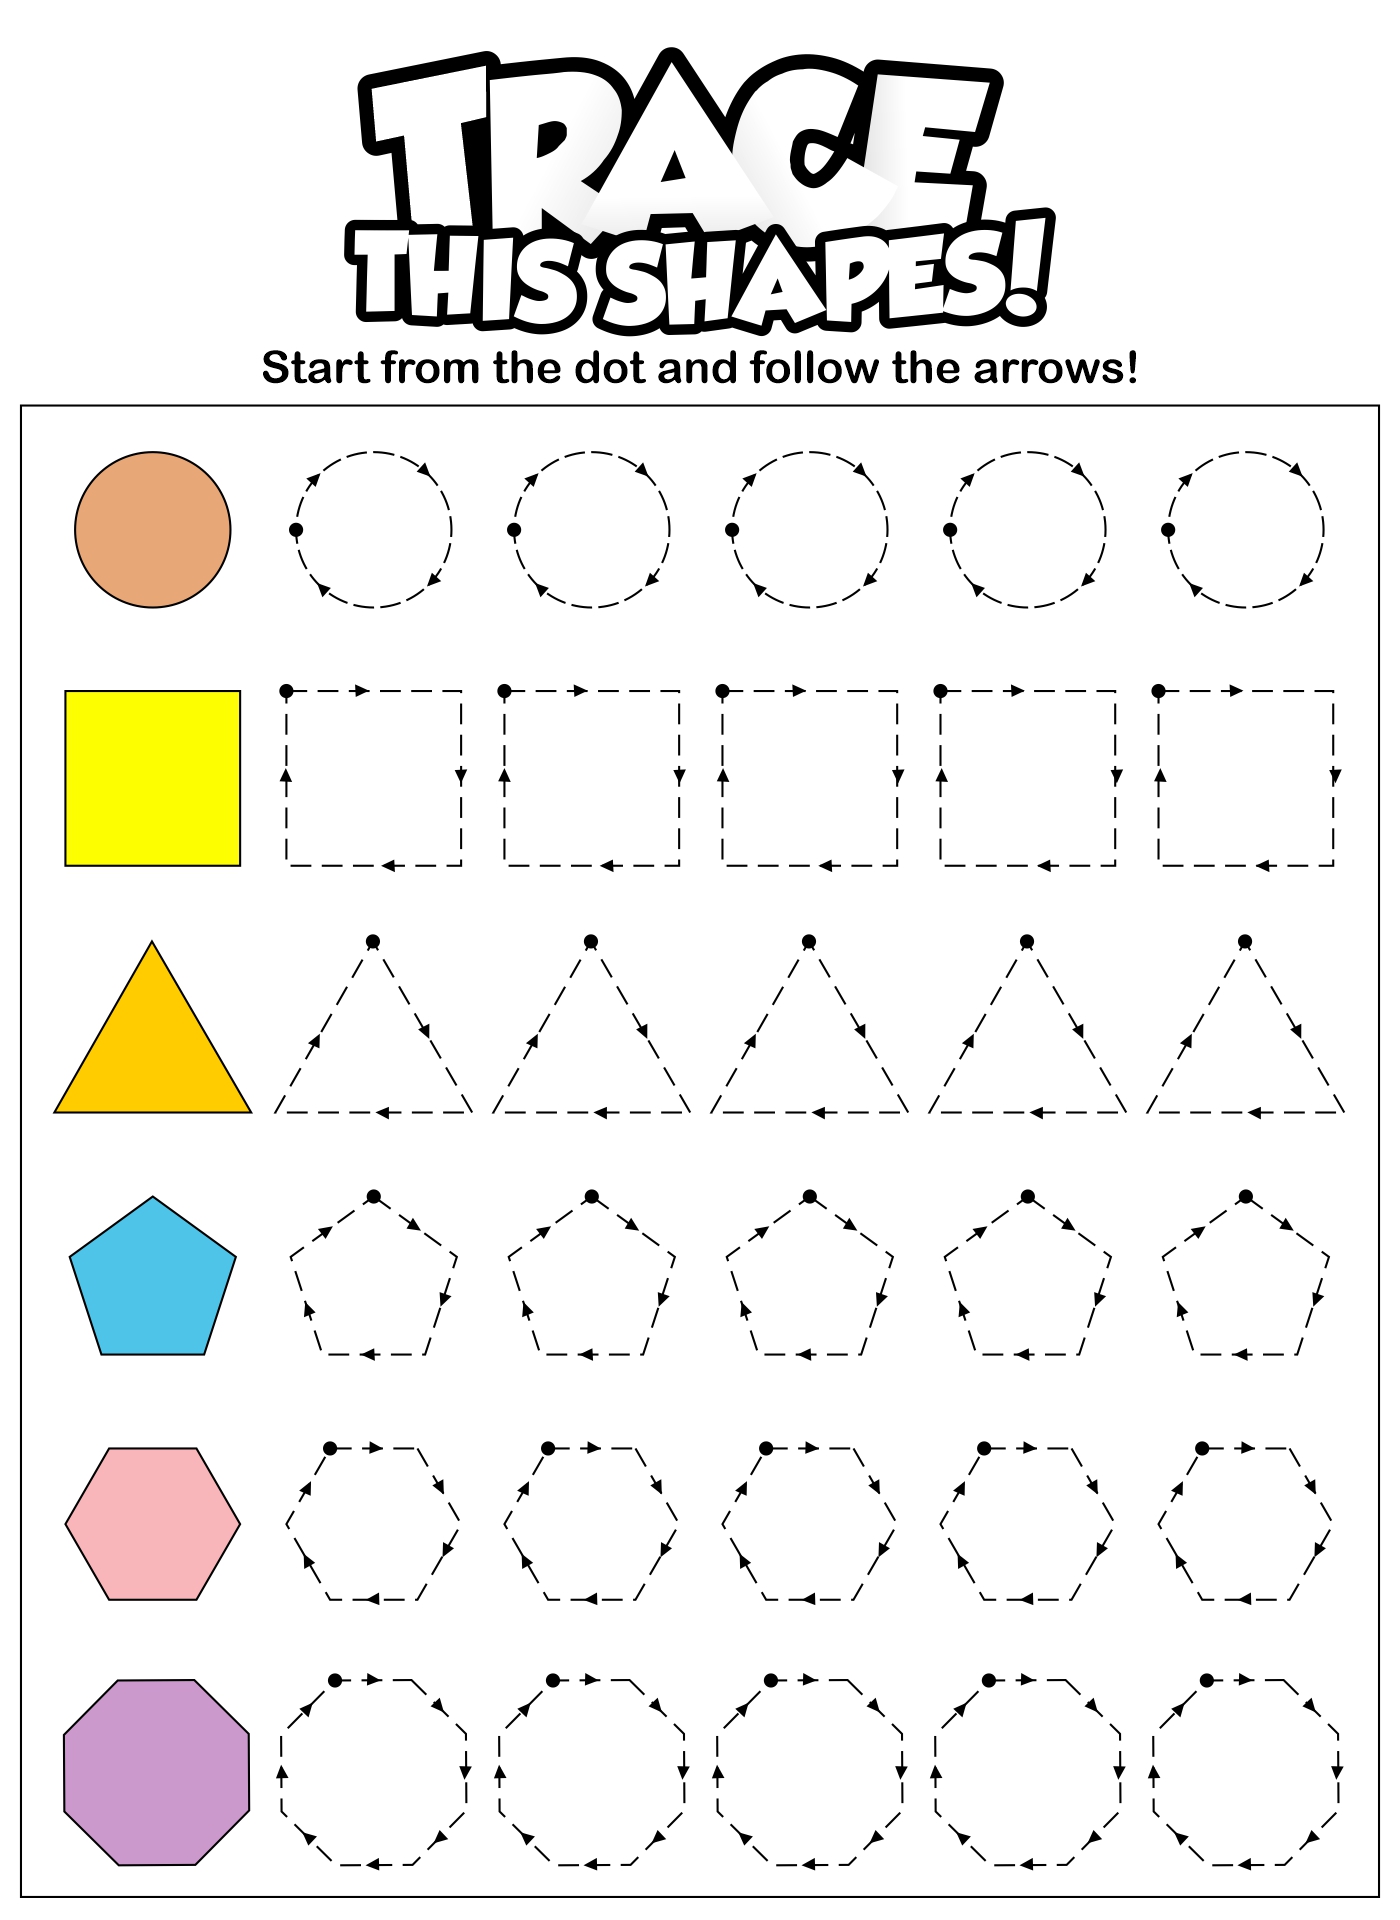 download-preschool-shapes-worksheets-gallery-rugby-rumilly